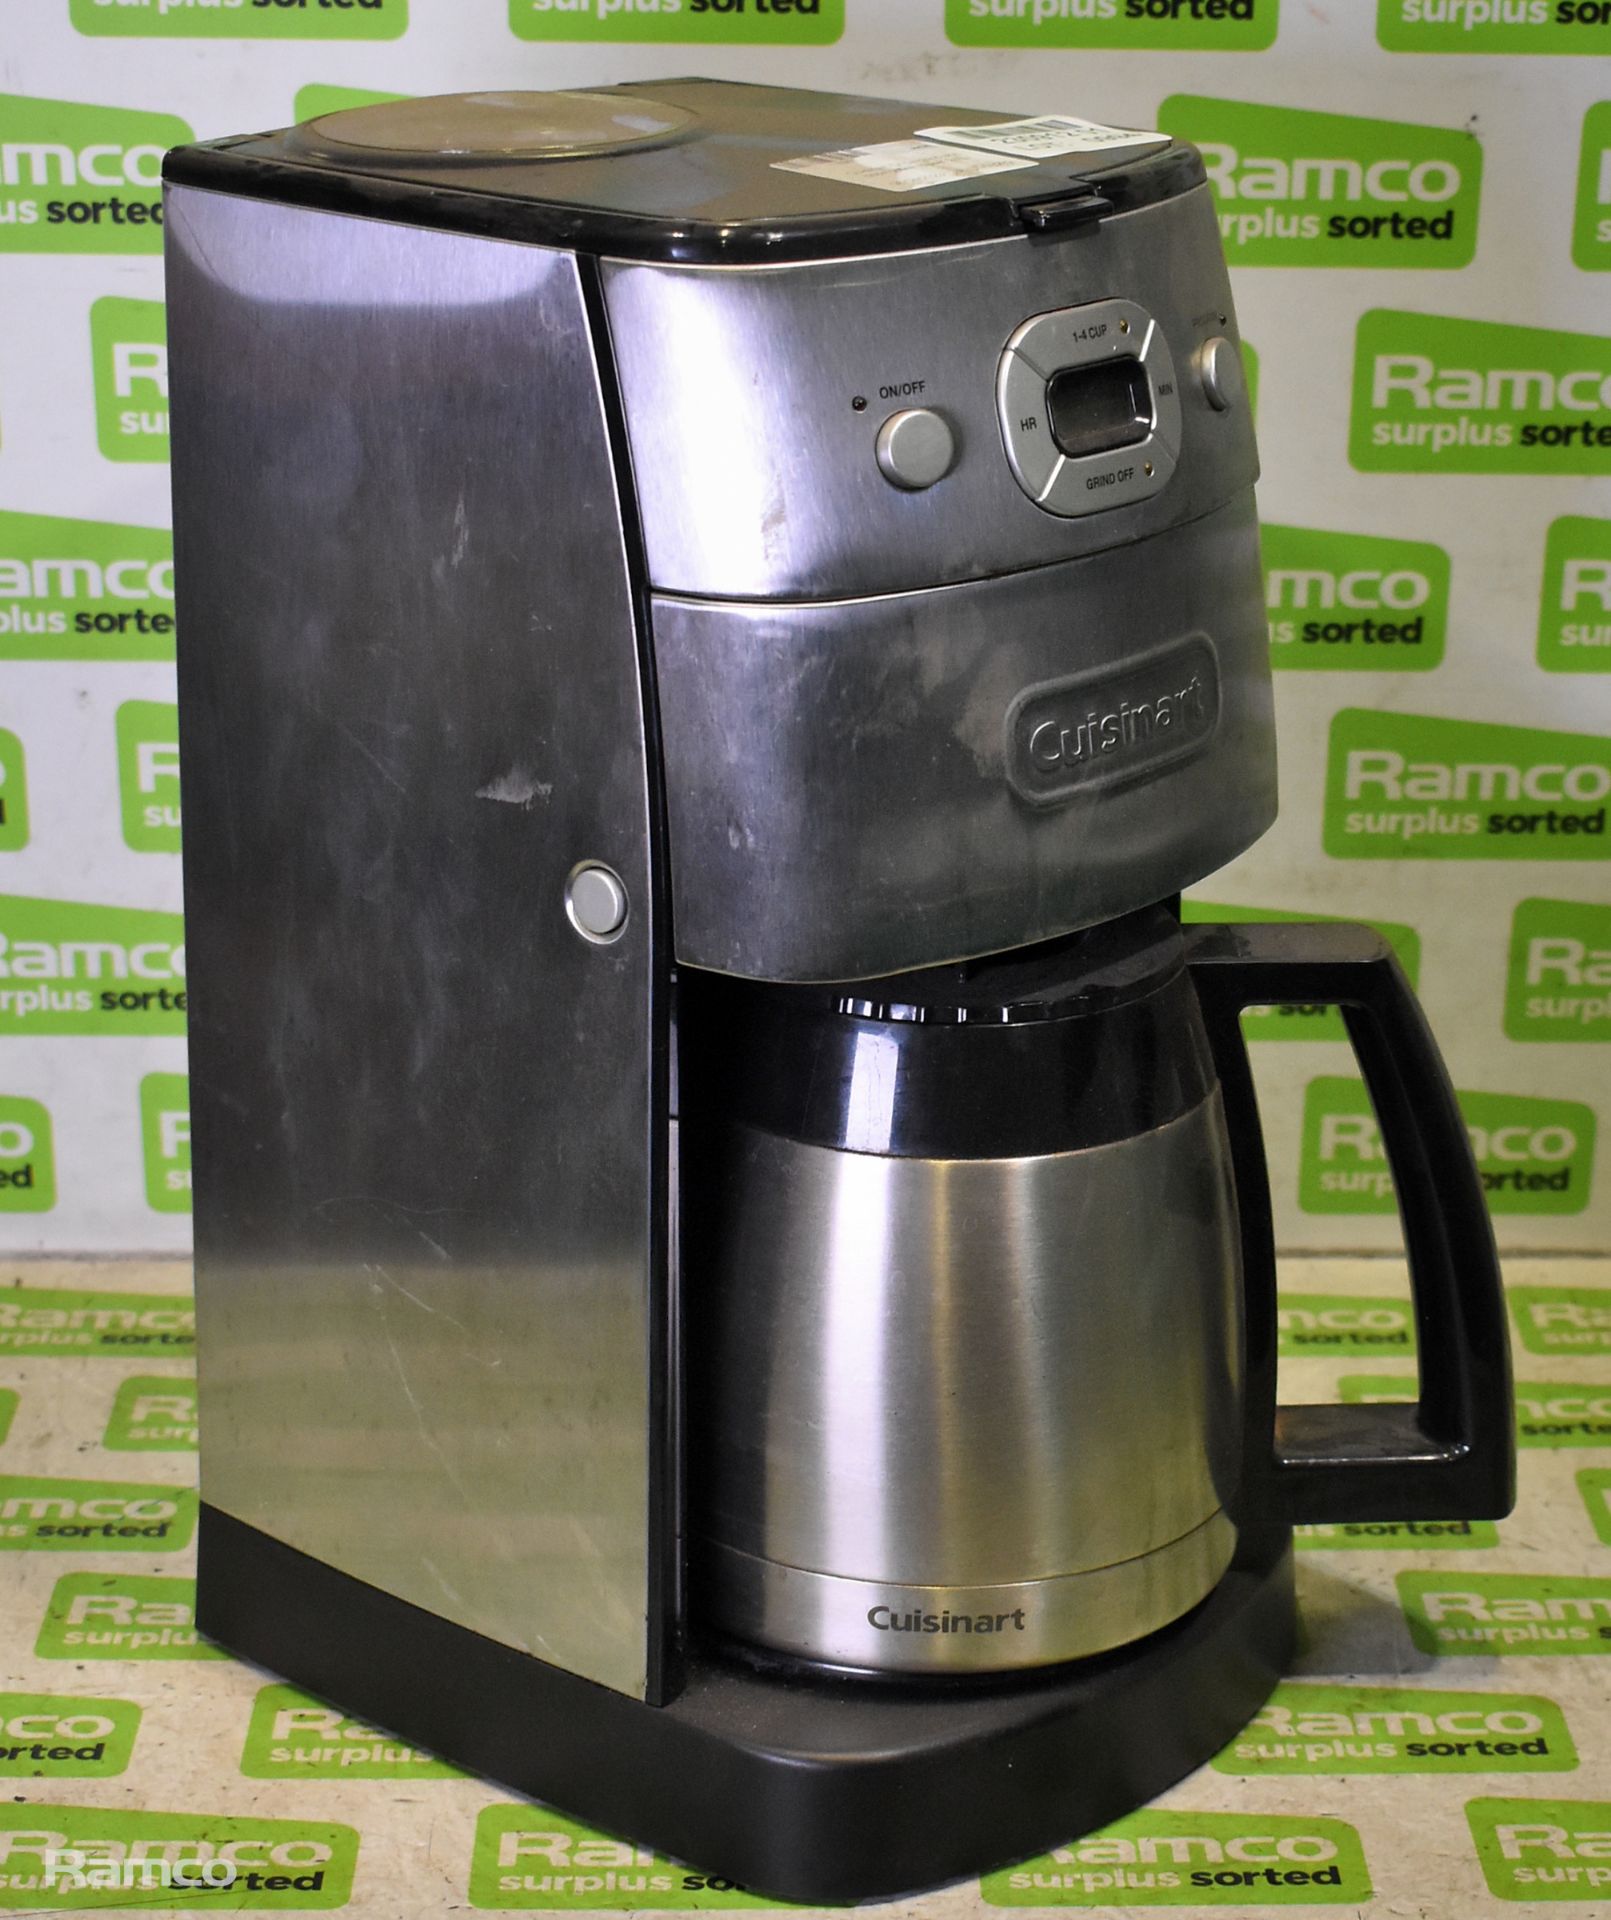 Cuisinart Q15s grind and brew coffee maker 240V - Image 2 of 5